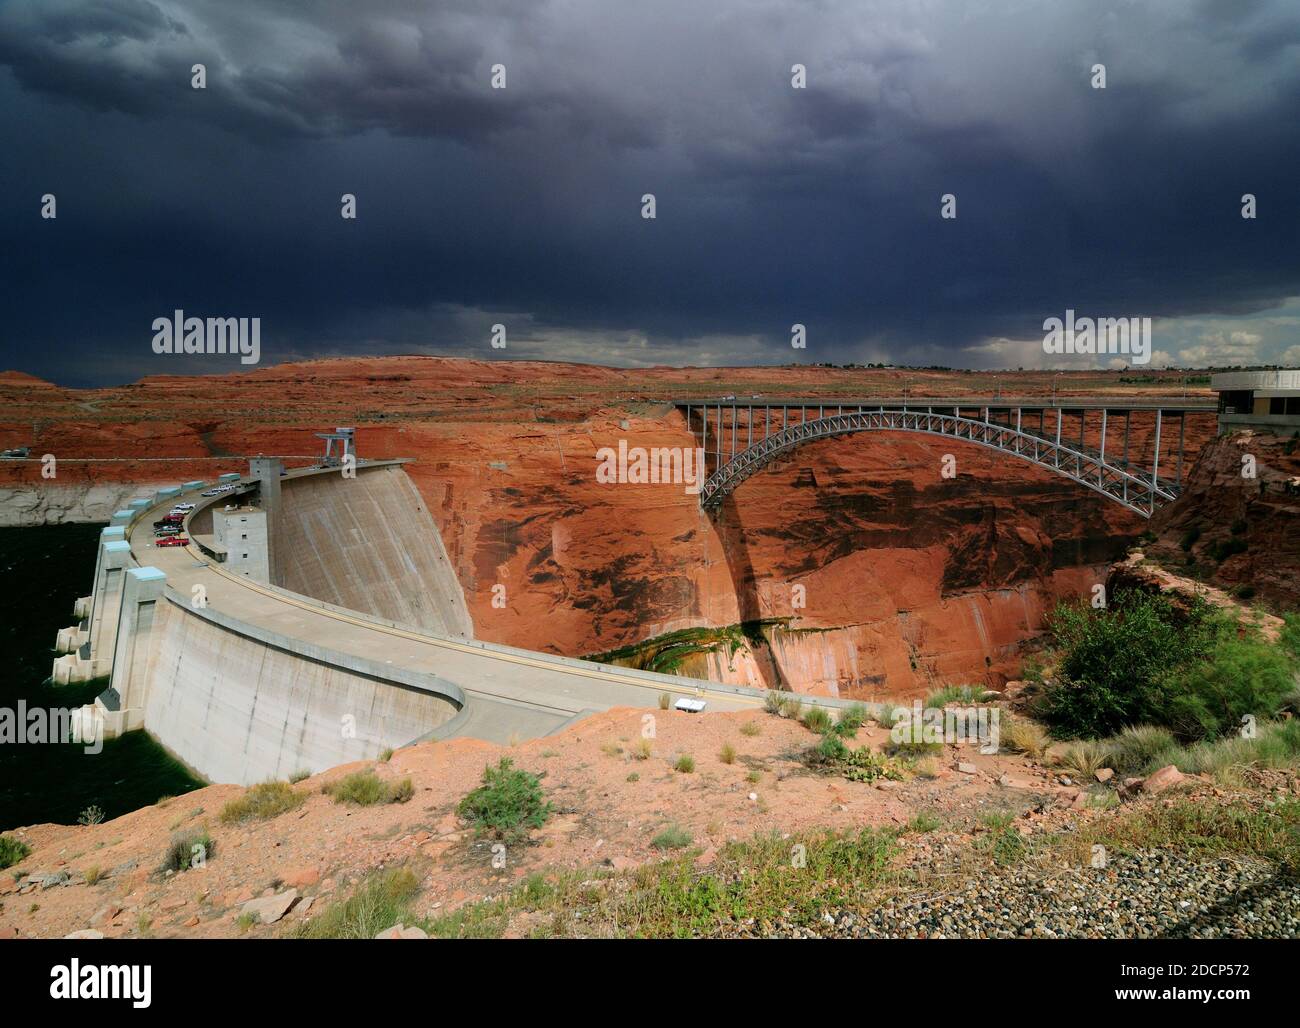 Glen Canyon Dam And Glen Canyon Dam Bridge Spanning The Colorado River On A Hot Sunny Summer Day With A Thunderstorm Approaching Stock Photo